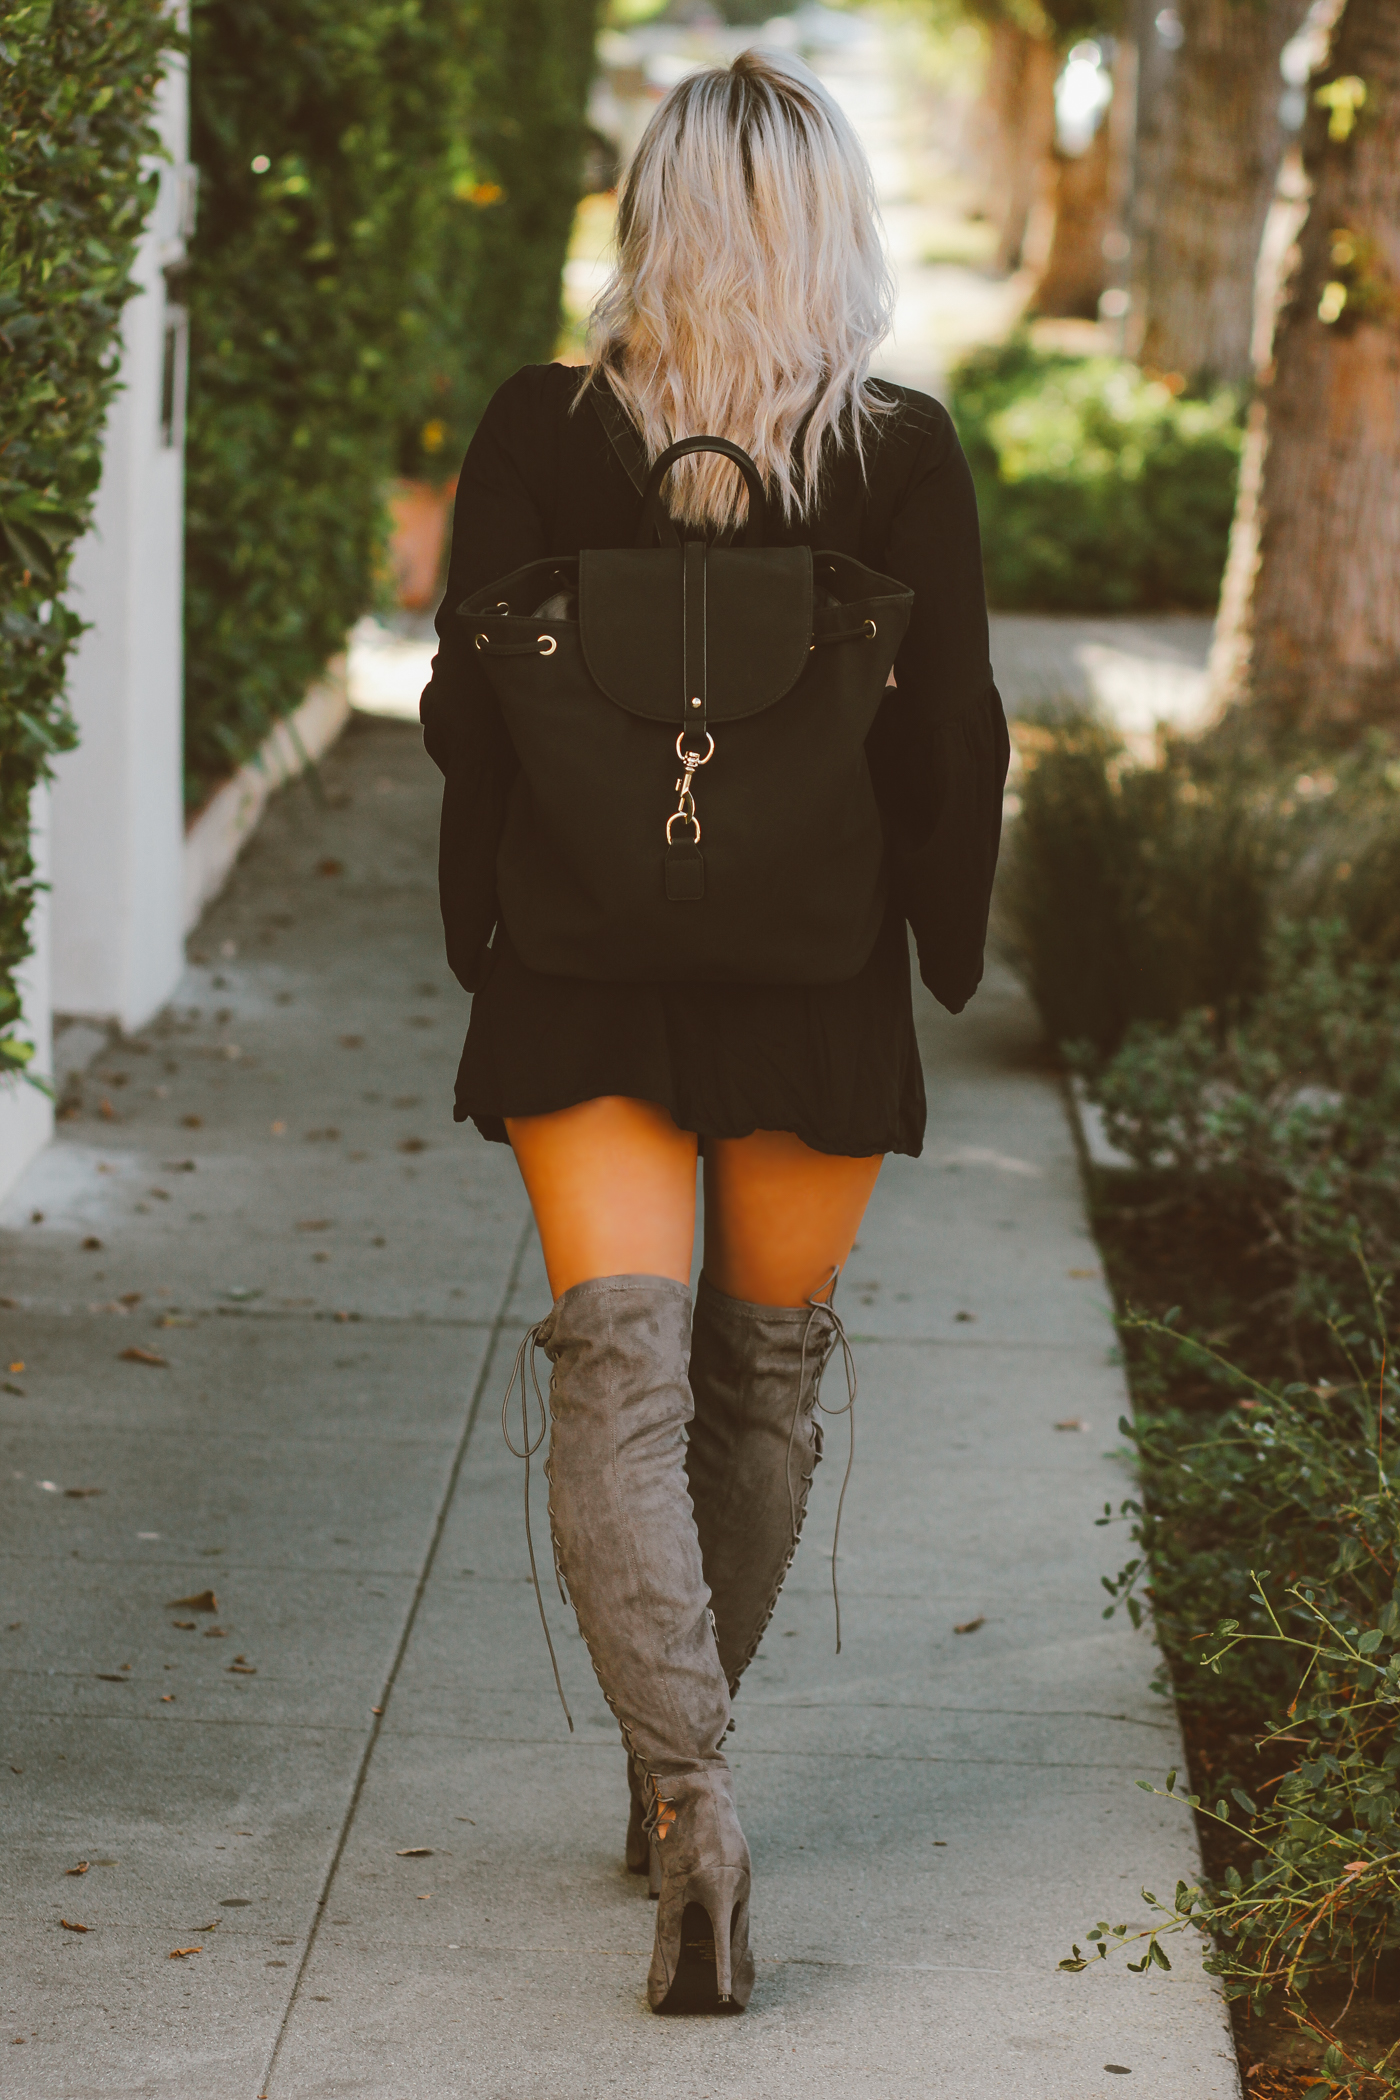 Blondie in the City | Black Bell Sleeve Dress @justfabonline | Suede Thigh High Boots @shoedazzle | Fall Fashion